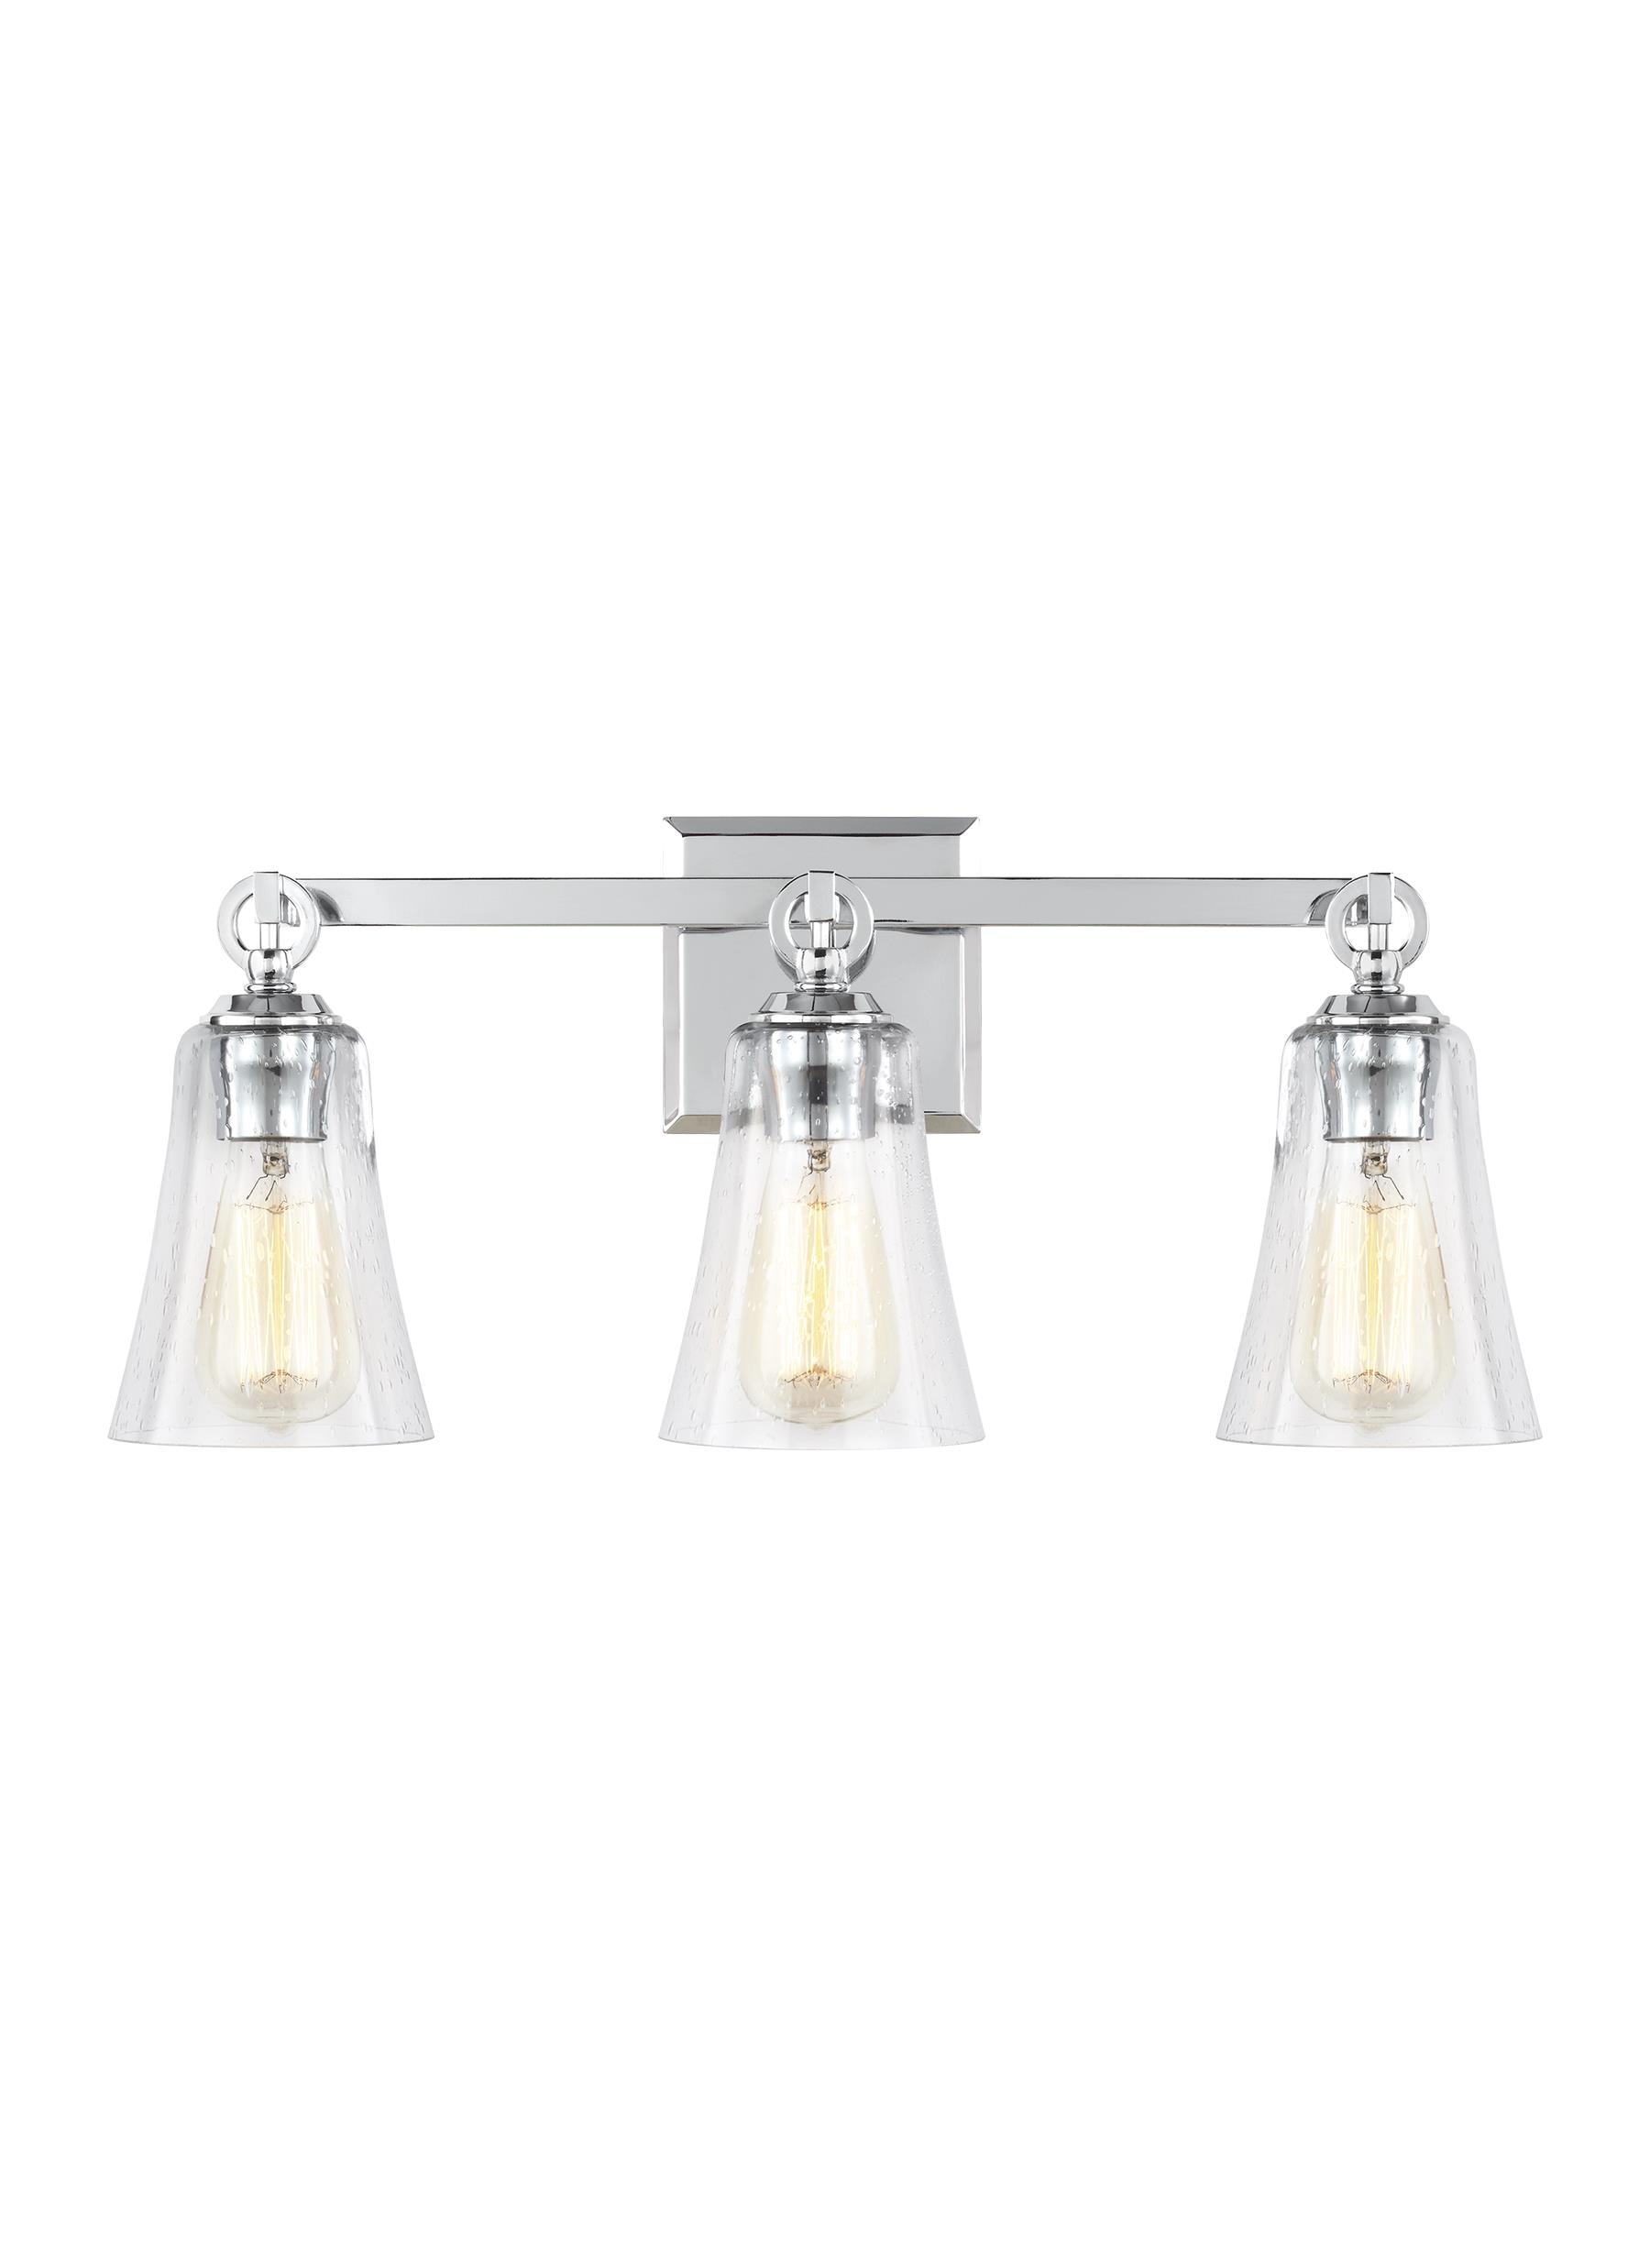 Generation Lighting Canfield 21.75-in 3-Light Chrome Transitional ...